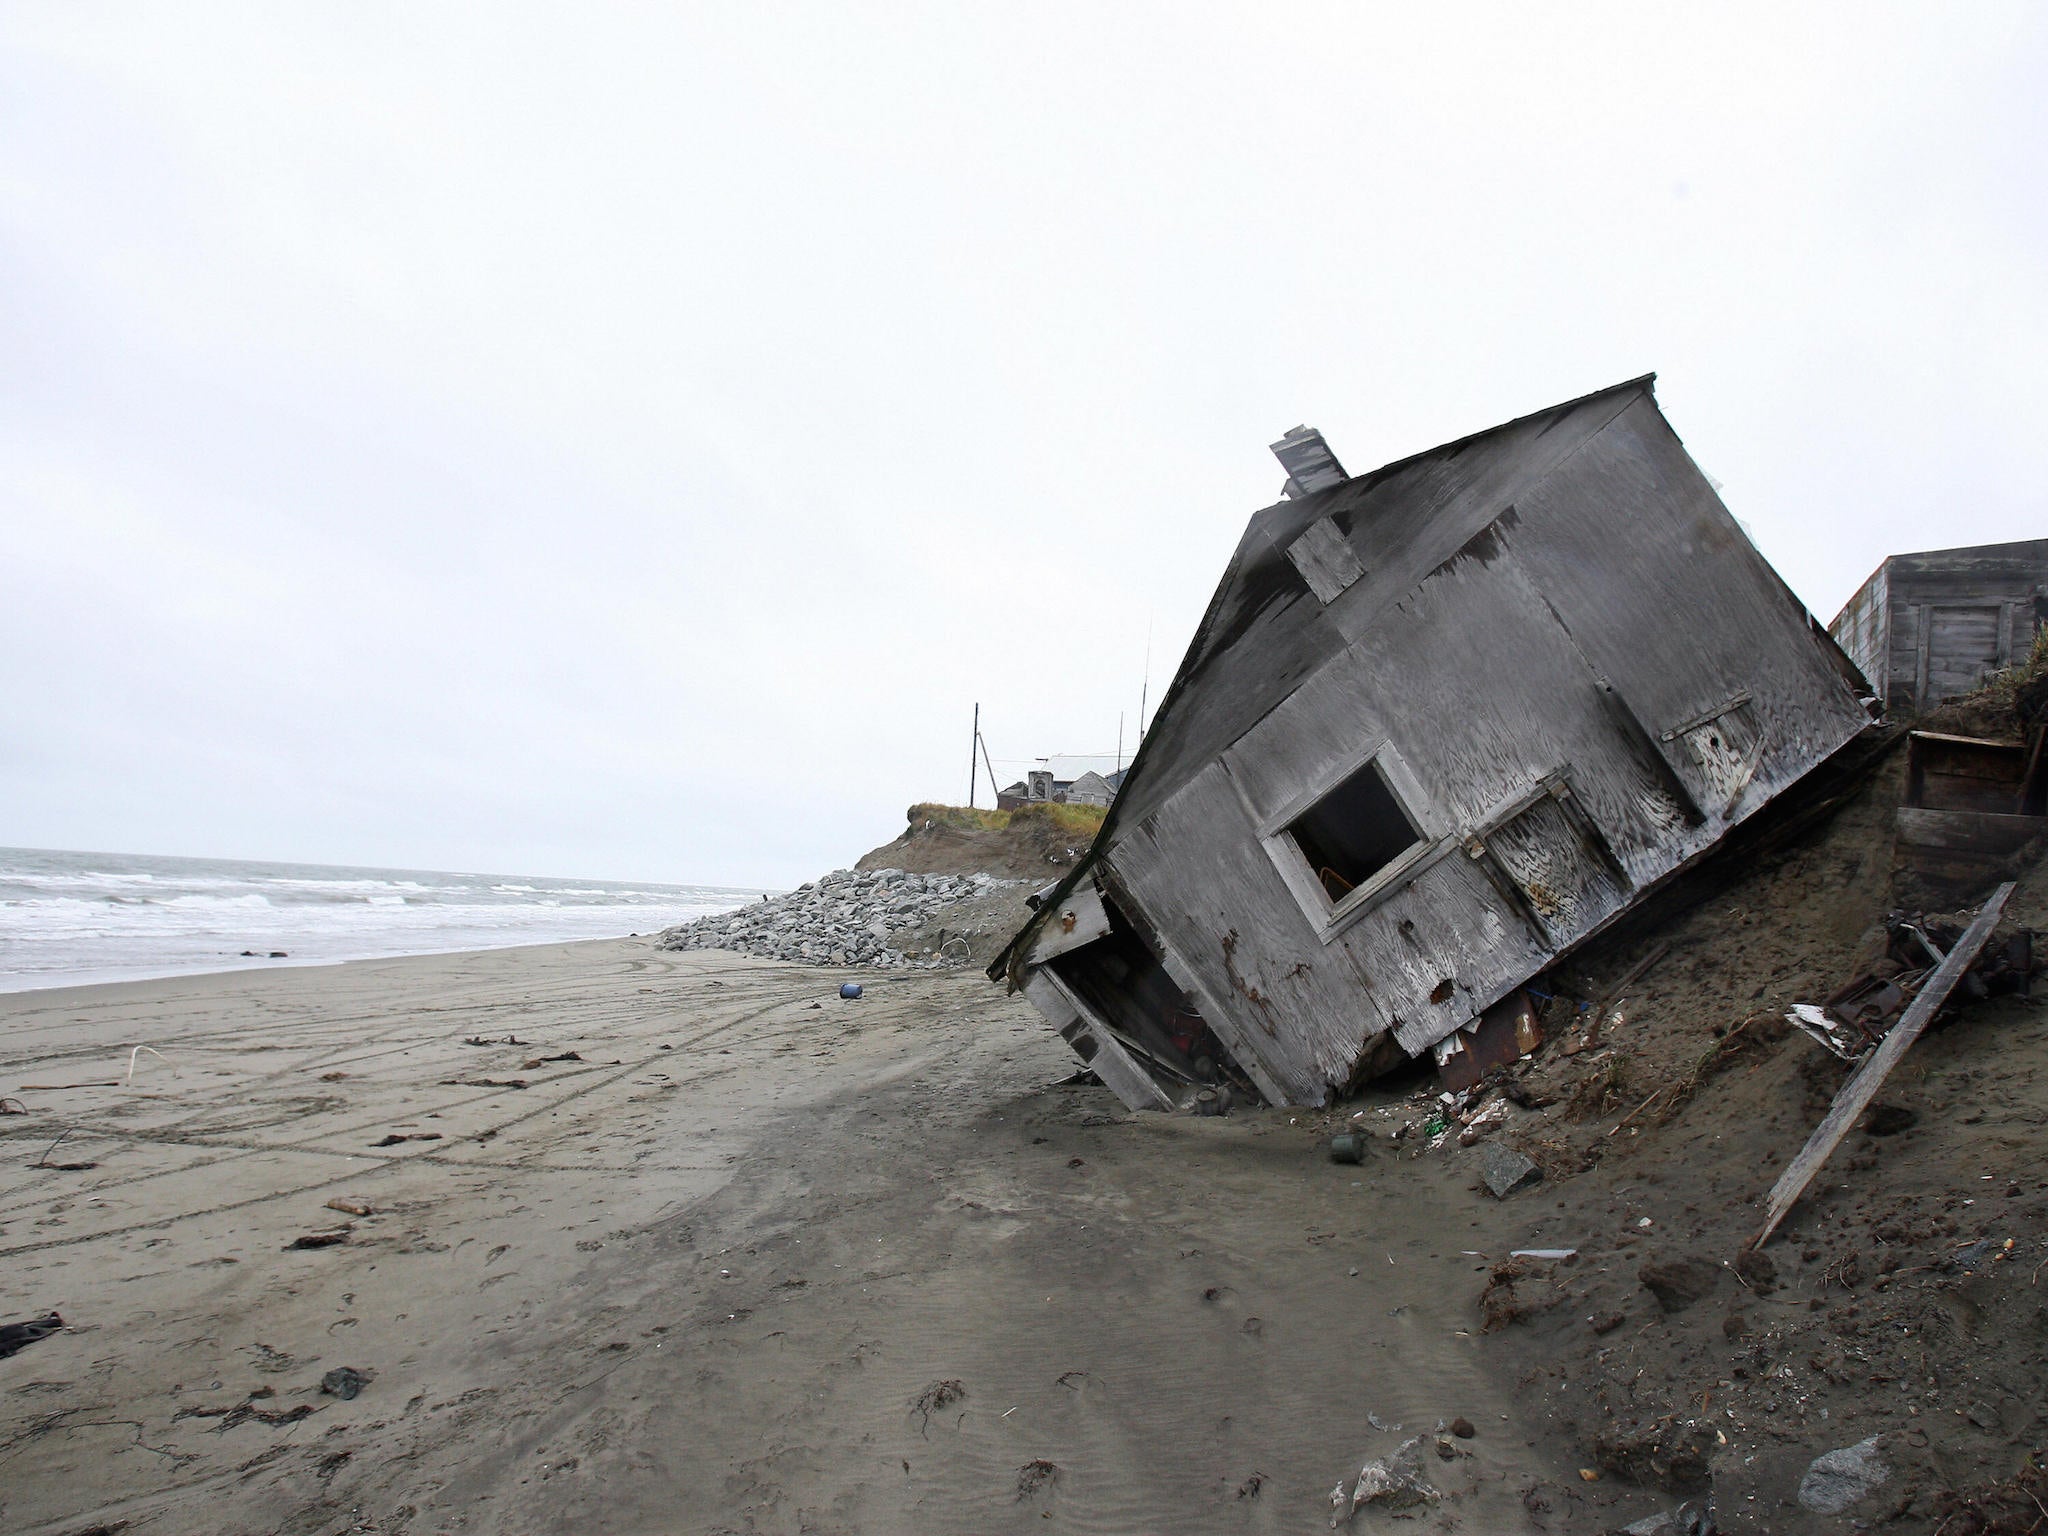 This 2006 image shows a home in the Alaskan village of Shishmaref destroyed by climate change